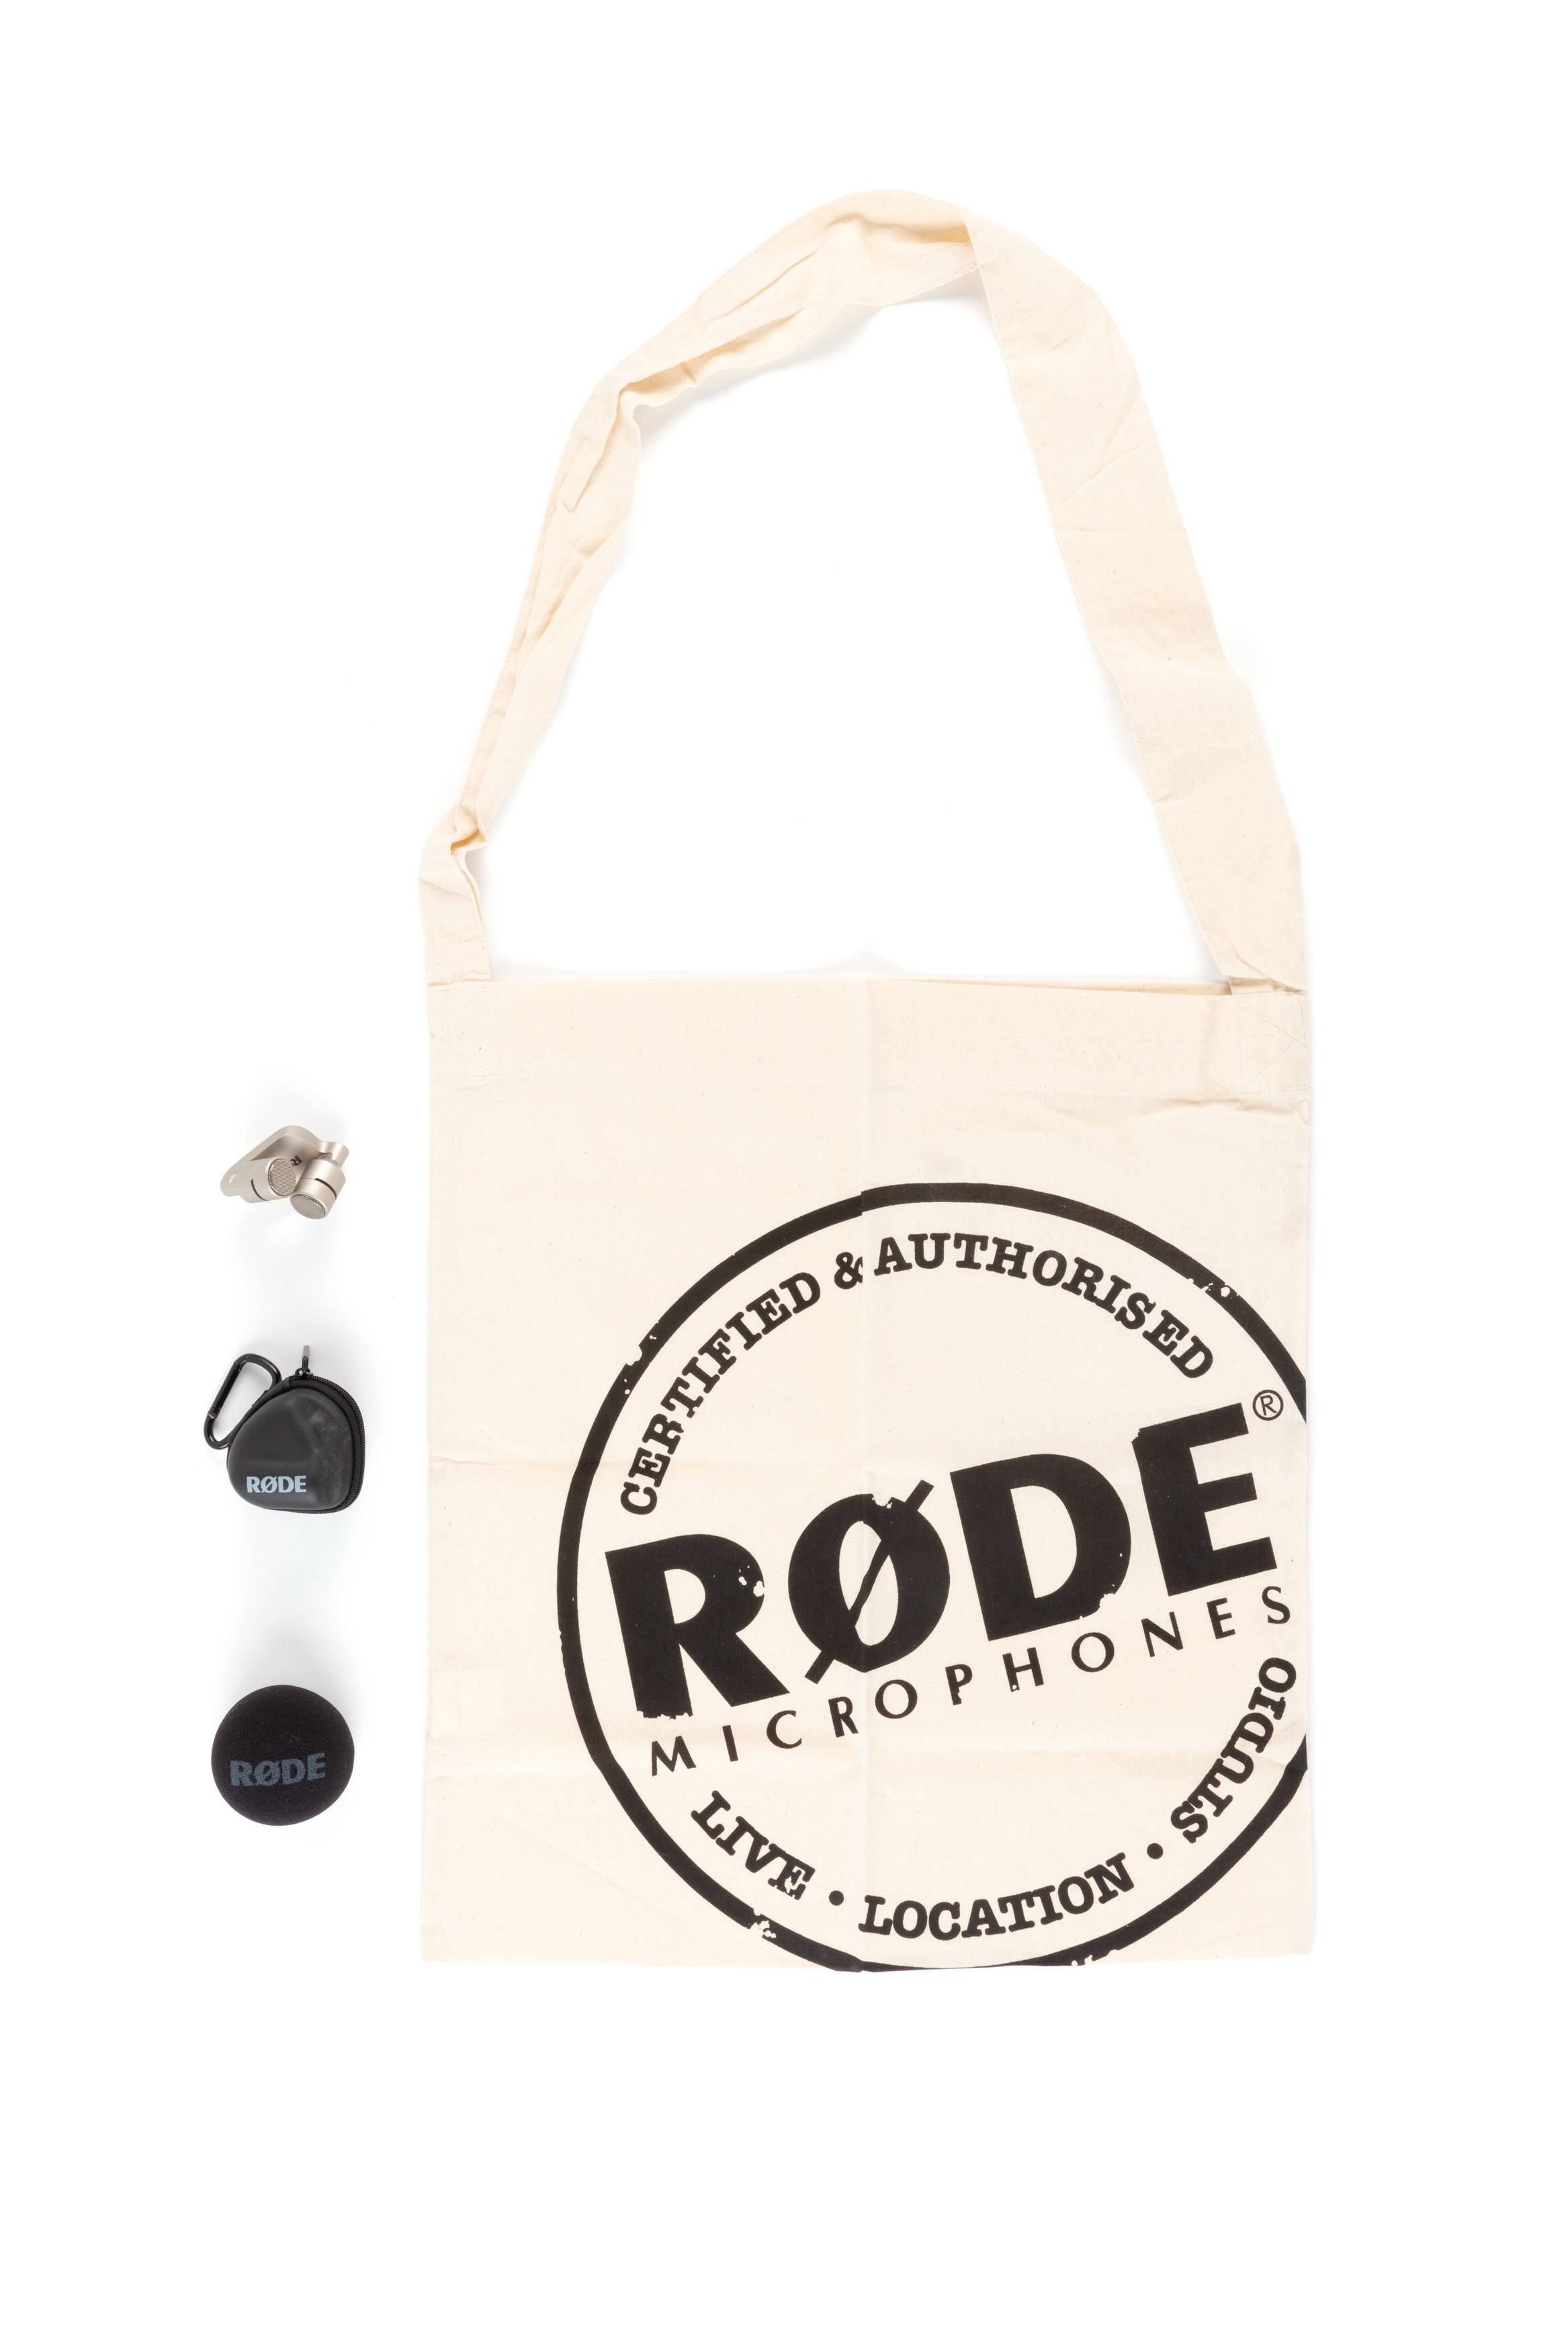 RØDE iXY directional microphone and packaging